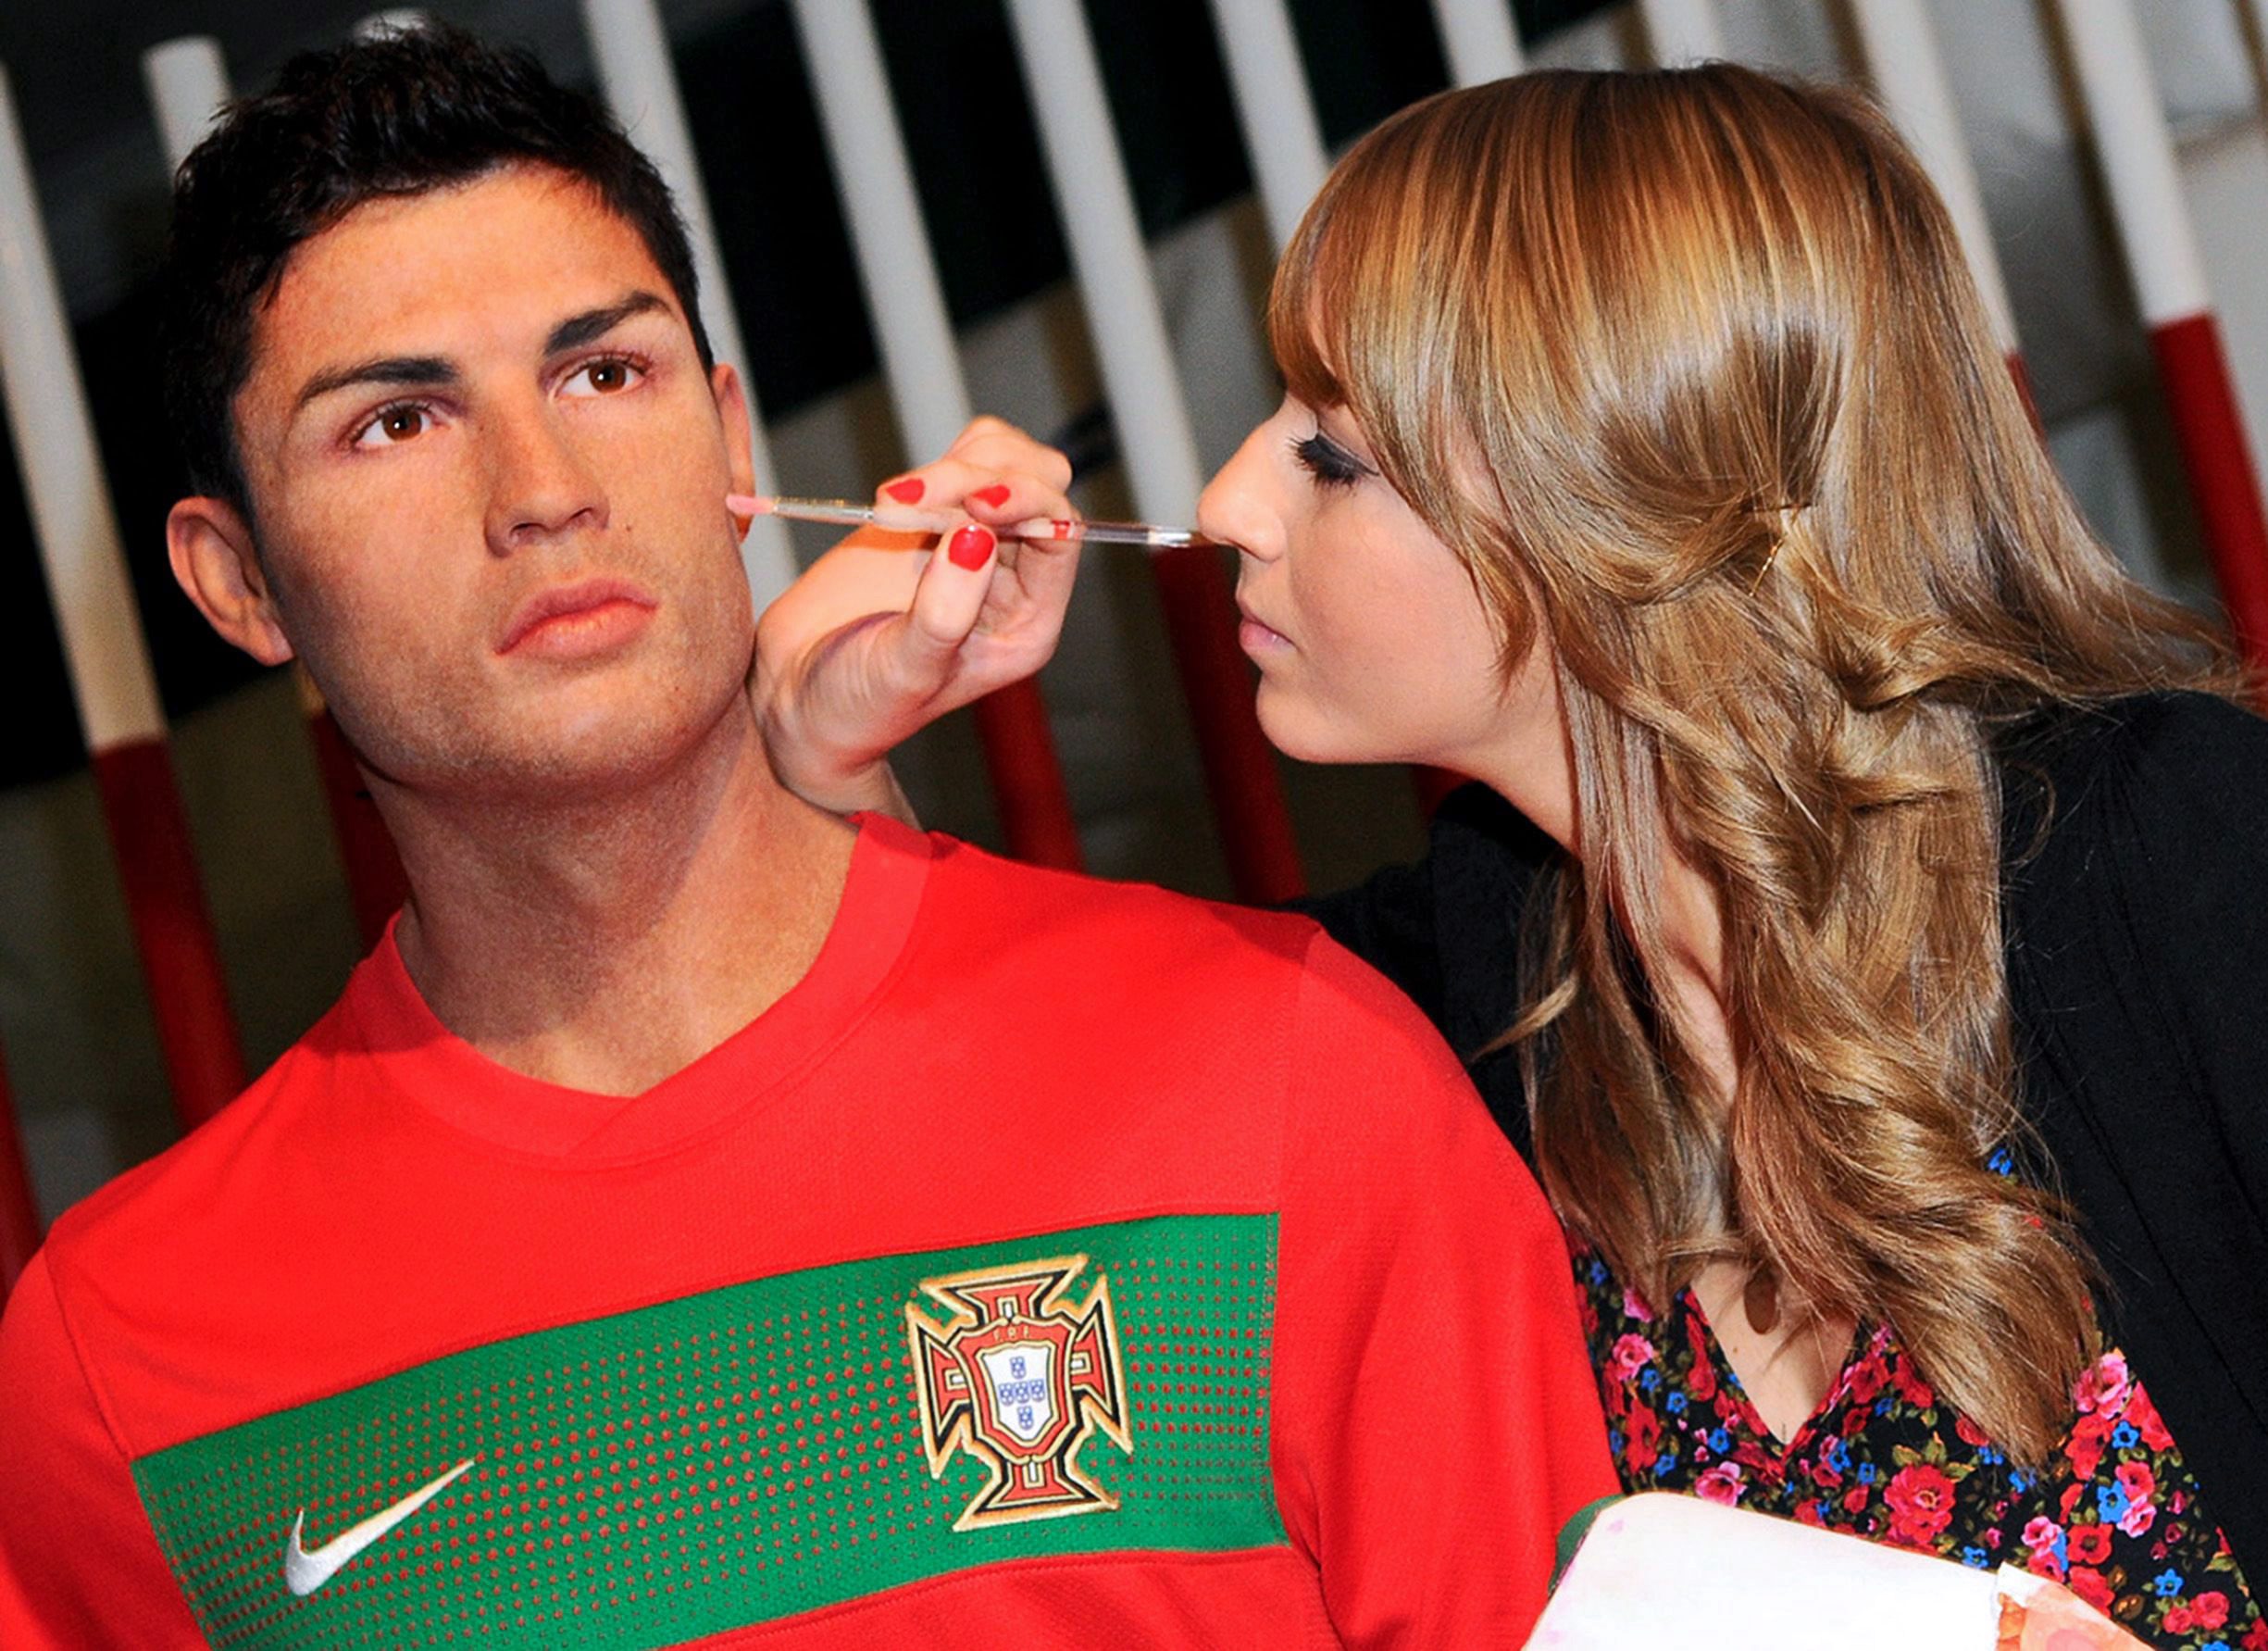 2010-06-09 19:09:51 epa02194171 A wax figure of Portuguese soccer player Cristiano Ronaldo is unveiled at Madame Tussauds museum in London, Britain, 09 June 2010. The waxwork was made to coincide with the start of the FIFA 2010 World Cup that is due to kick off on 11 June in Johannesburg, South Africa. EPA/BRUNO MANTEIGAS .